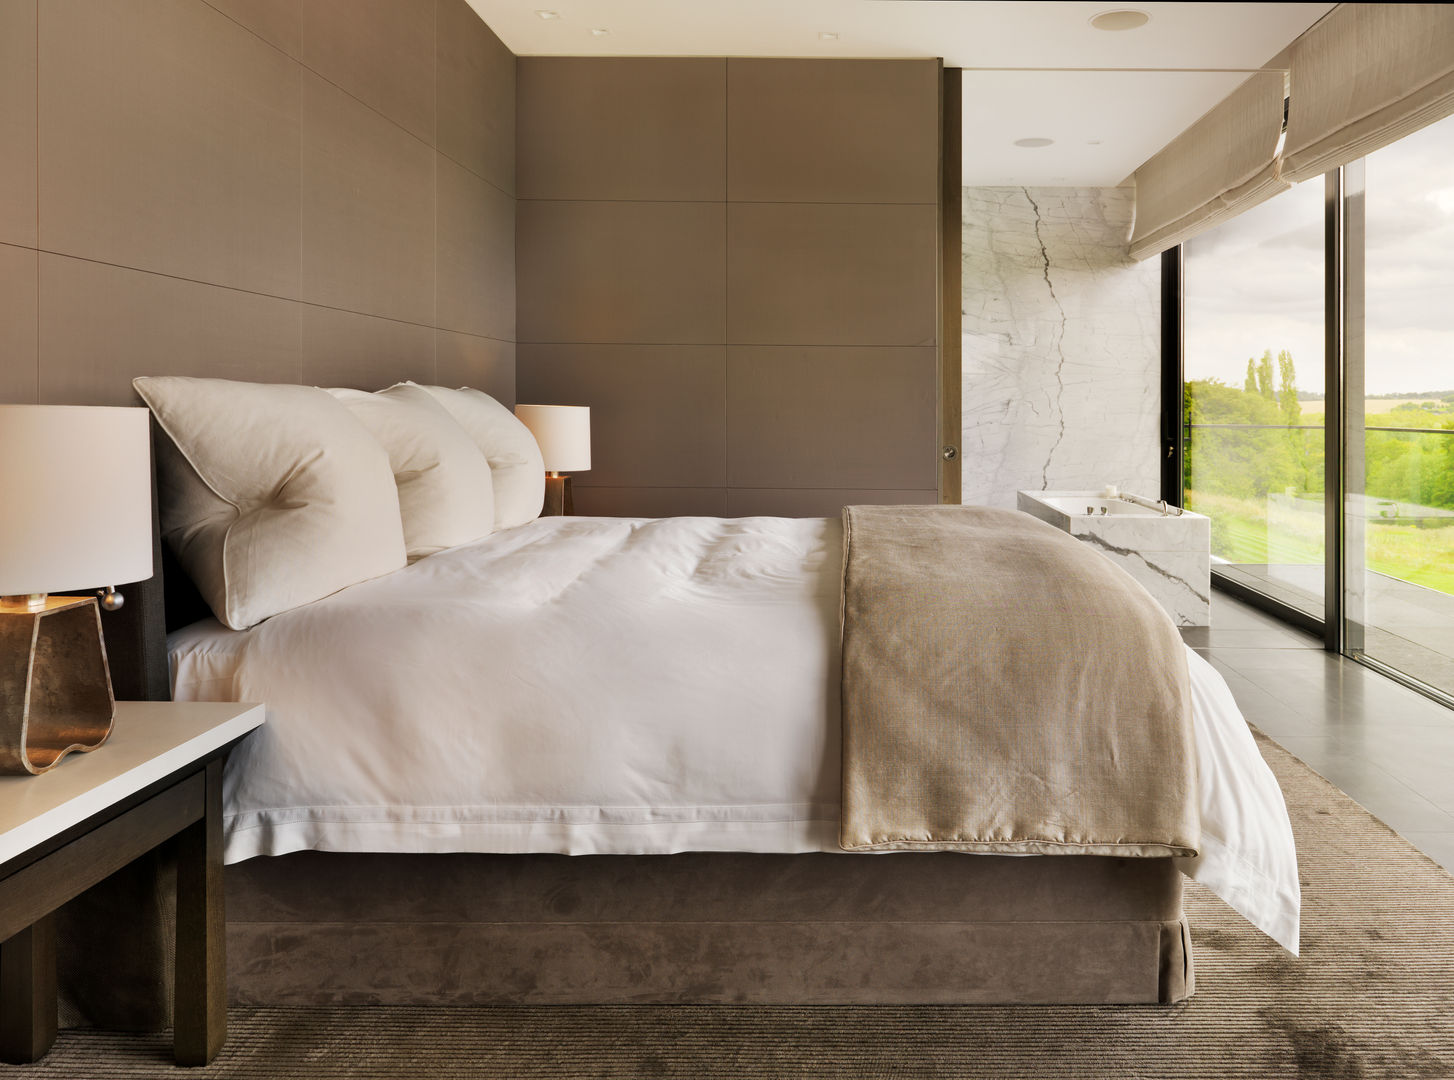 Berkshire, Gregory Phillips Architects Gregory Phillips Architects Modern style bedroom